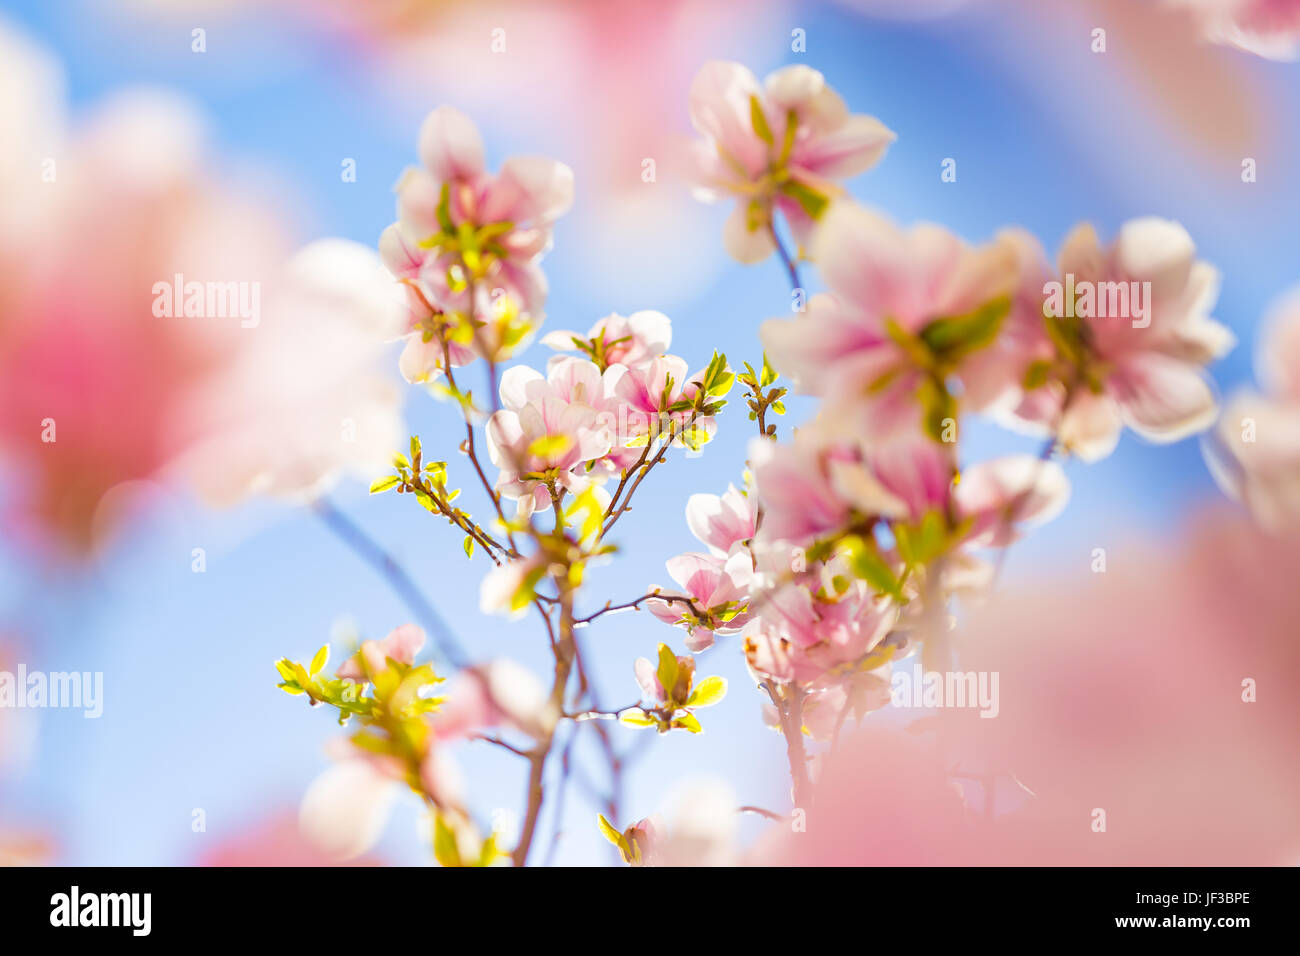 Amazing spring flowers background. Bright and soft spring summer background with flowers and blue sky. Abstract floral concept for springtime Stock Photo